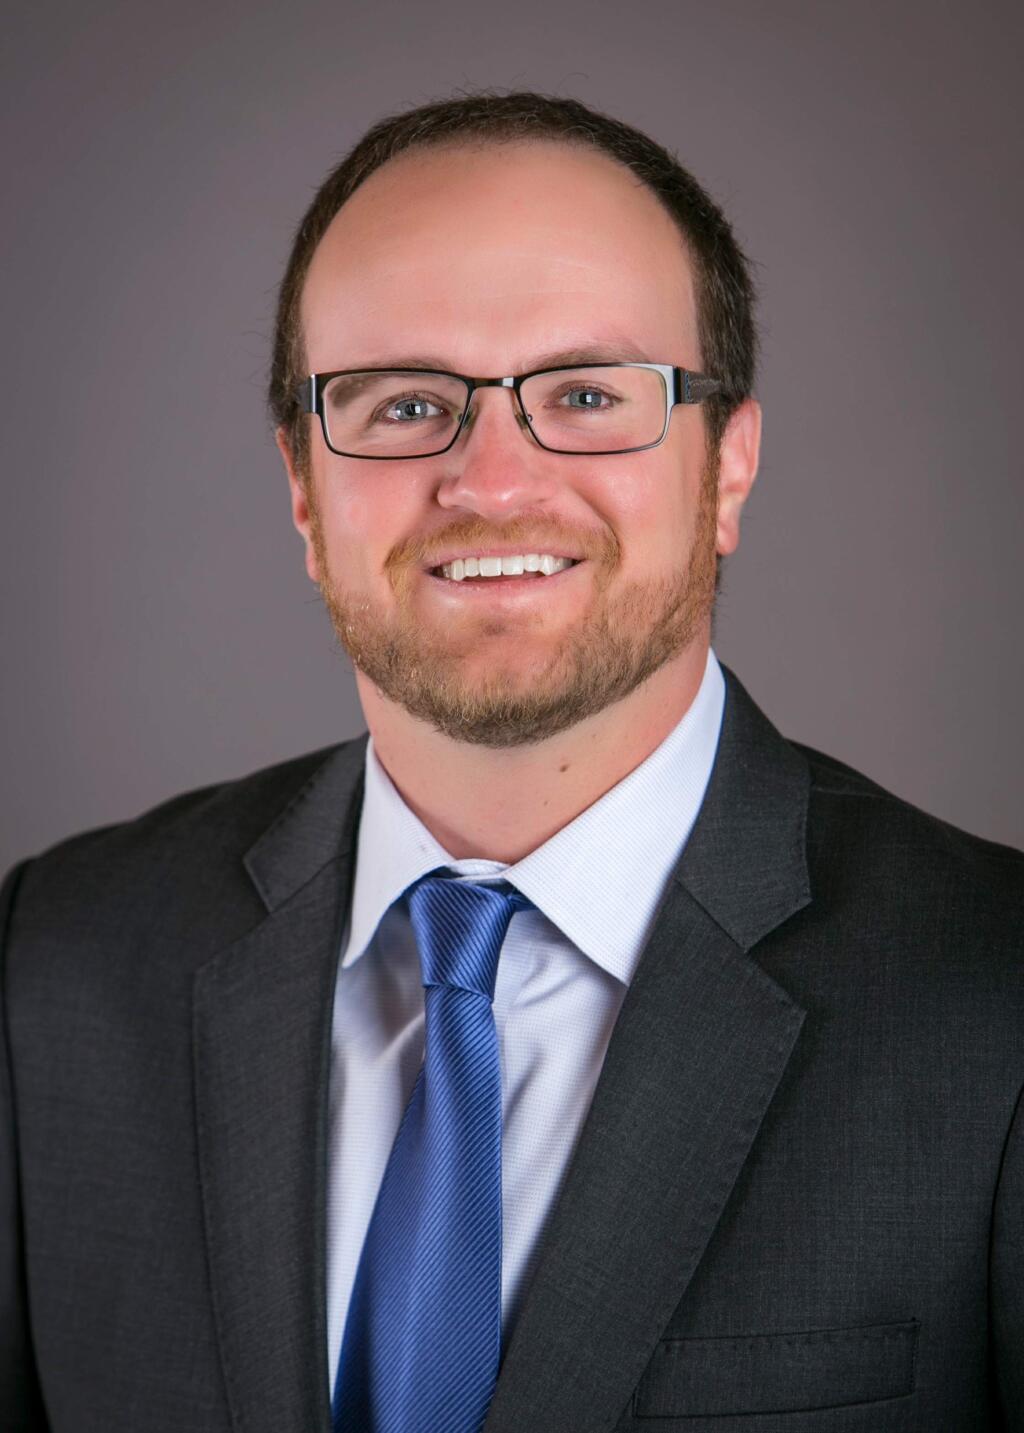 Matthew Hunstock, 38, financial adviser for Ameriprise Financial Services Inc. in Santa Rosa, is one of North Bay Business Journal's Forty Under 40 notable young professionals for 2019. (BELLA PHOTOGRAPHY & DESIGN)